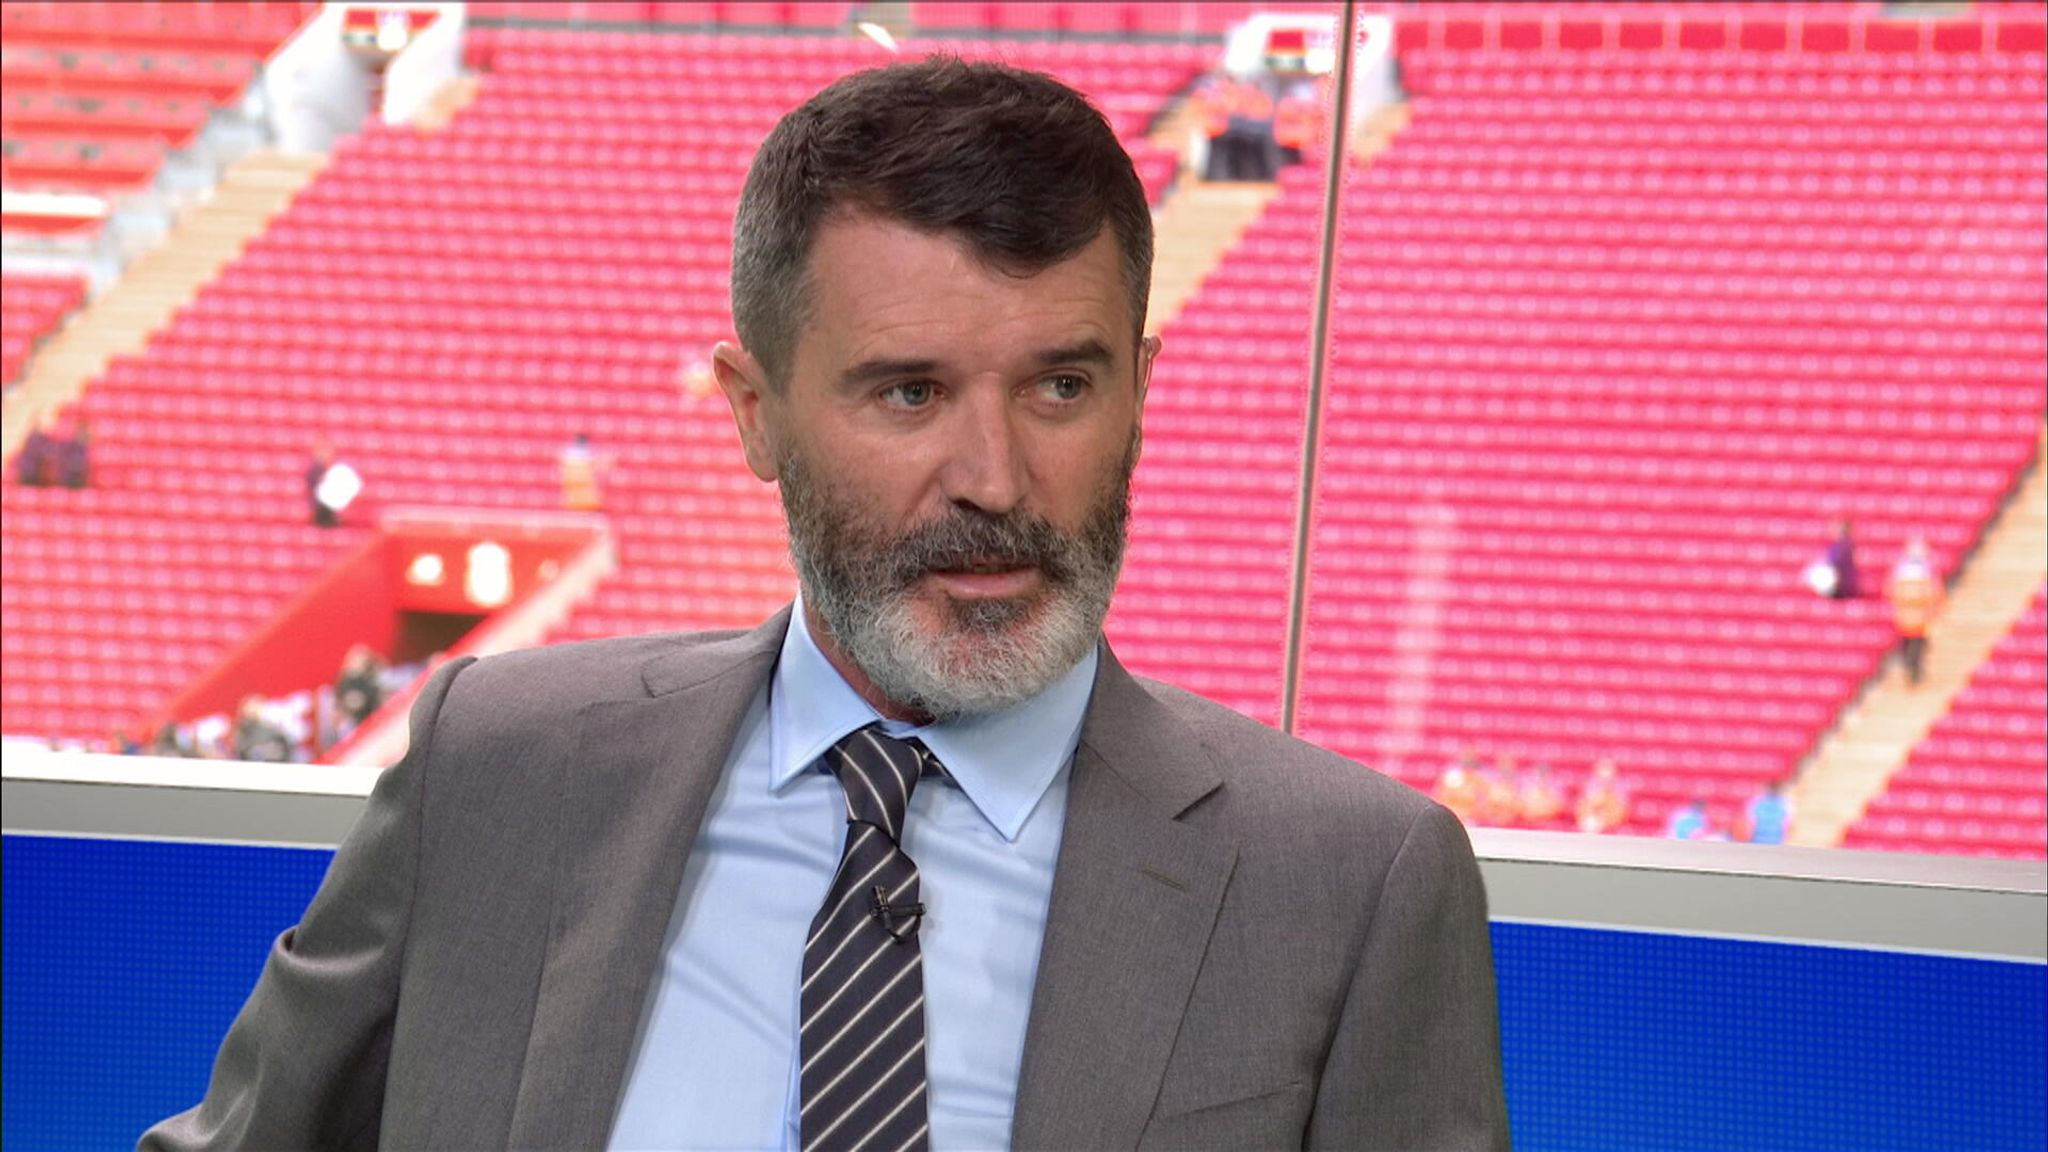 Manchester Derby: United legend Roy Keane blasted both Shaw and De Gea at half-time for conceding City’s second